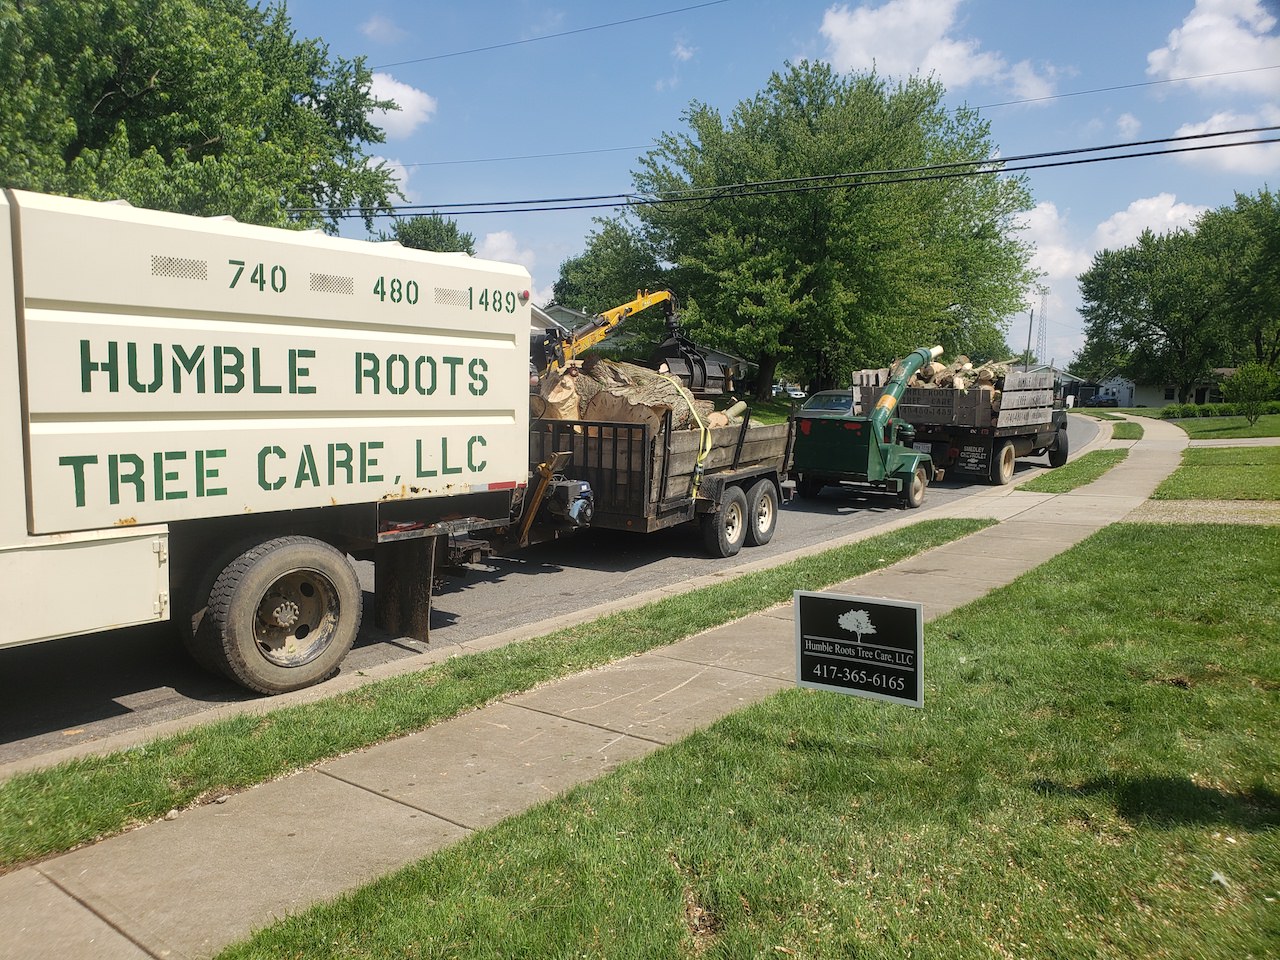 Humble Roots Tree Care arrives